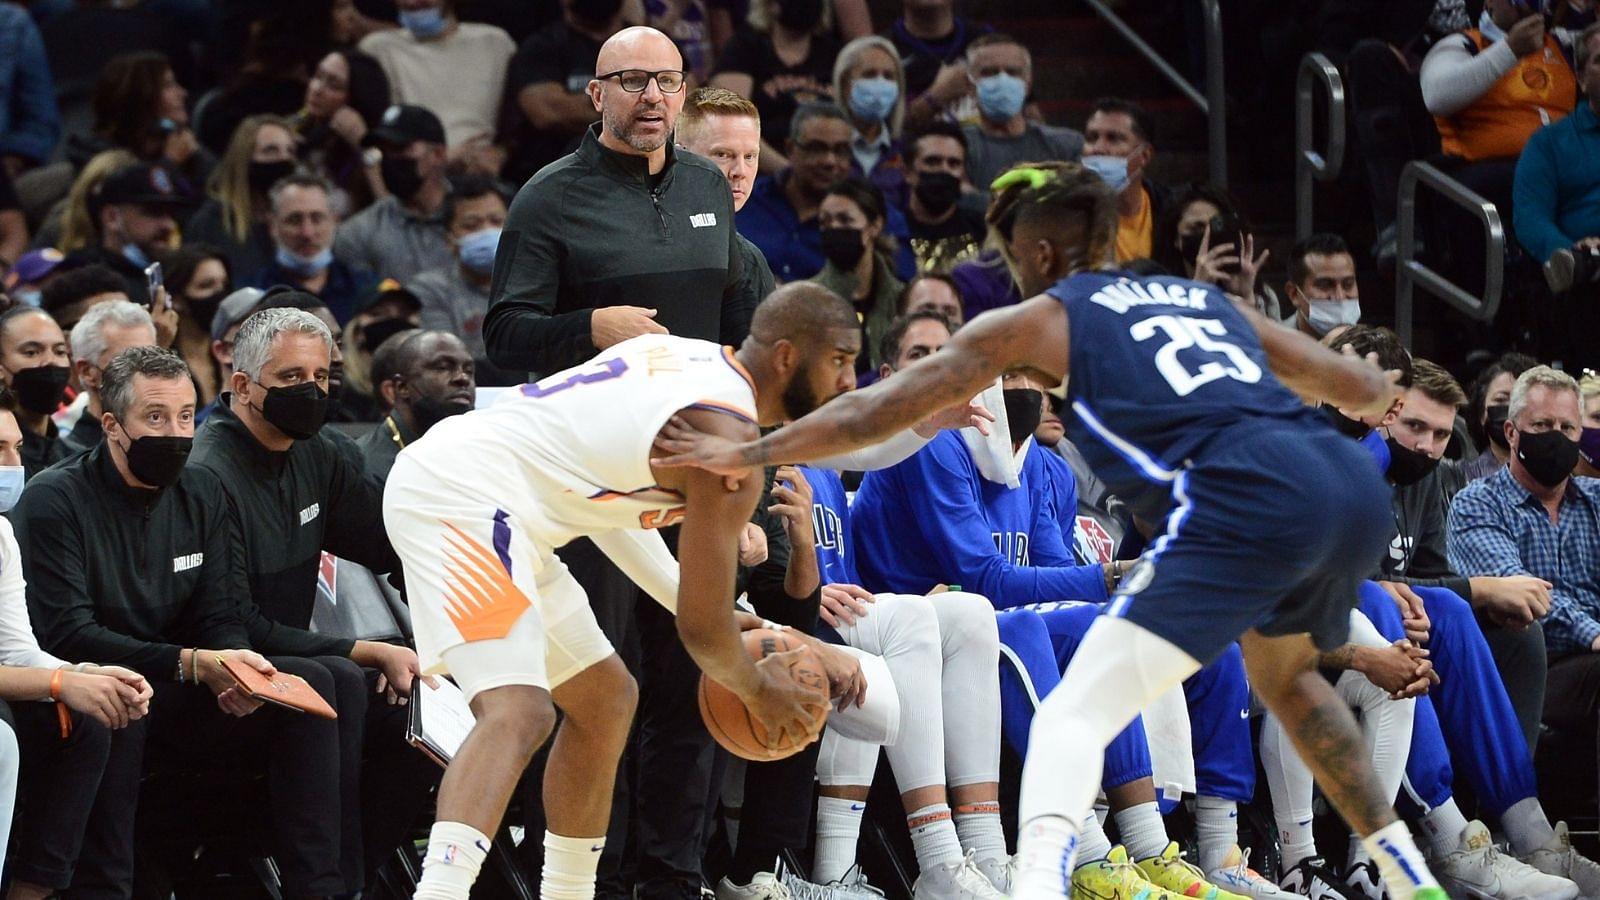 "We’re being taught by one of the best point guards ever, Chris Paul, on how to do things": Jason Kidd takes a subtle dig at CP3 as Luka Doncic and Co drew crucial fouls in Mavericks win